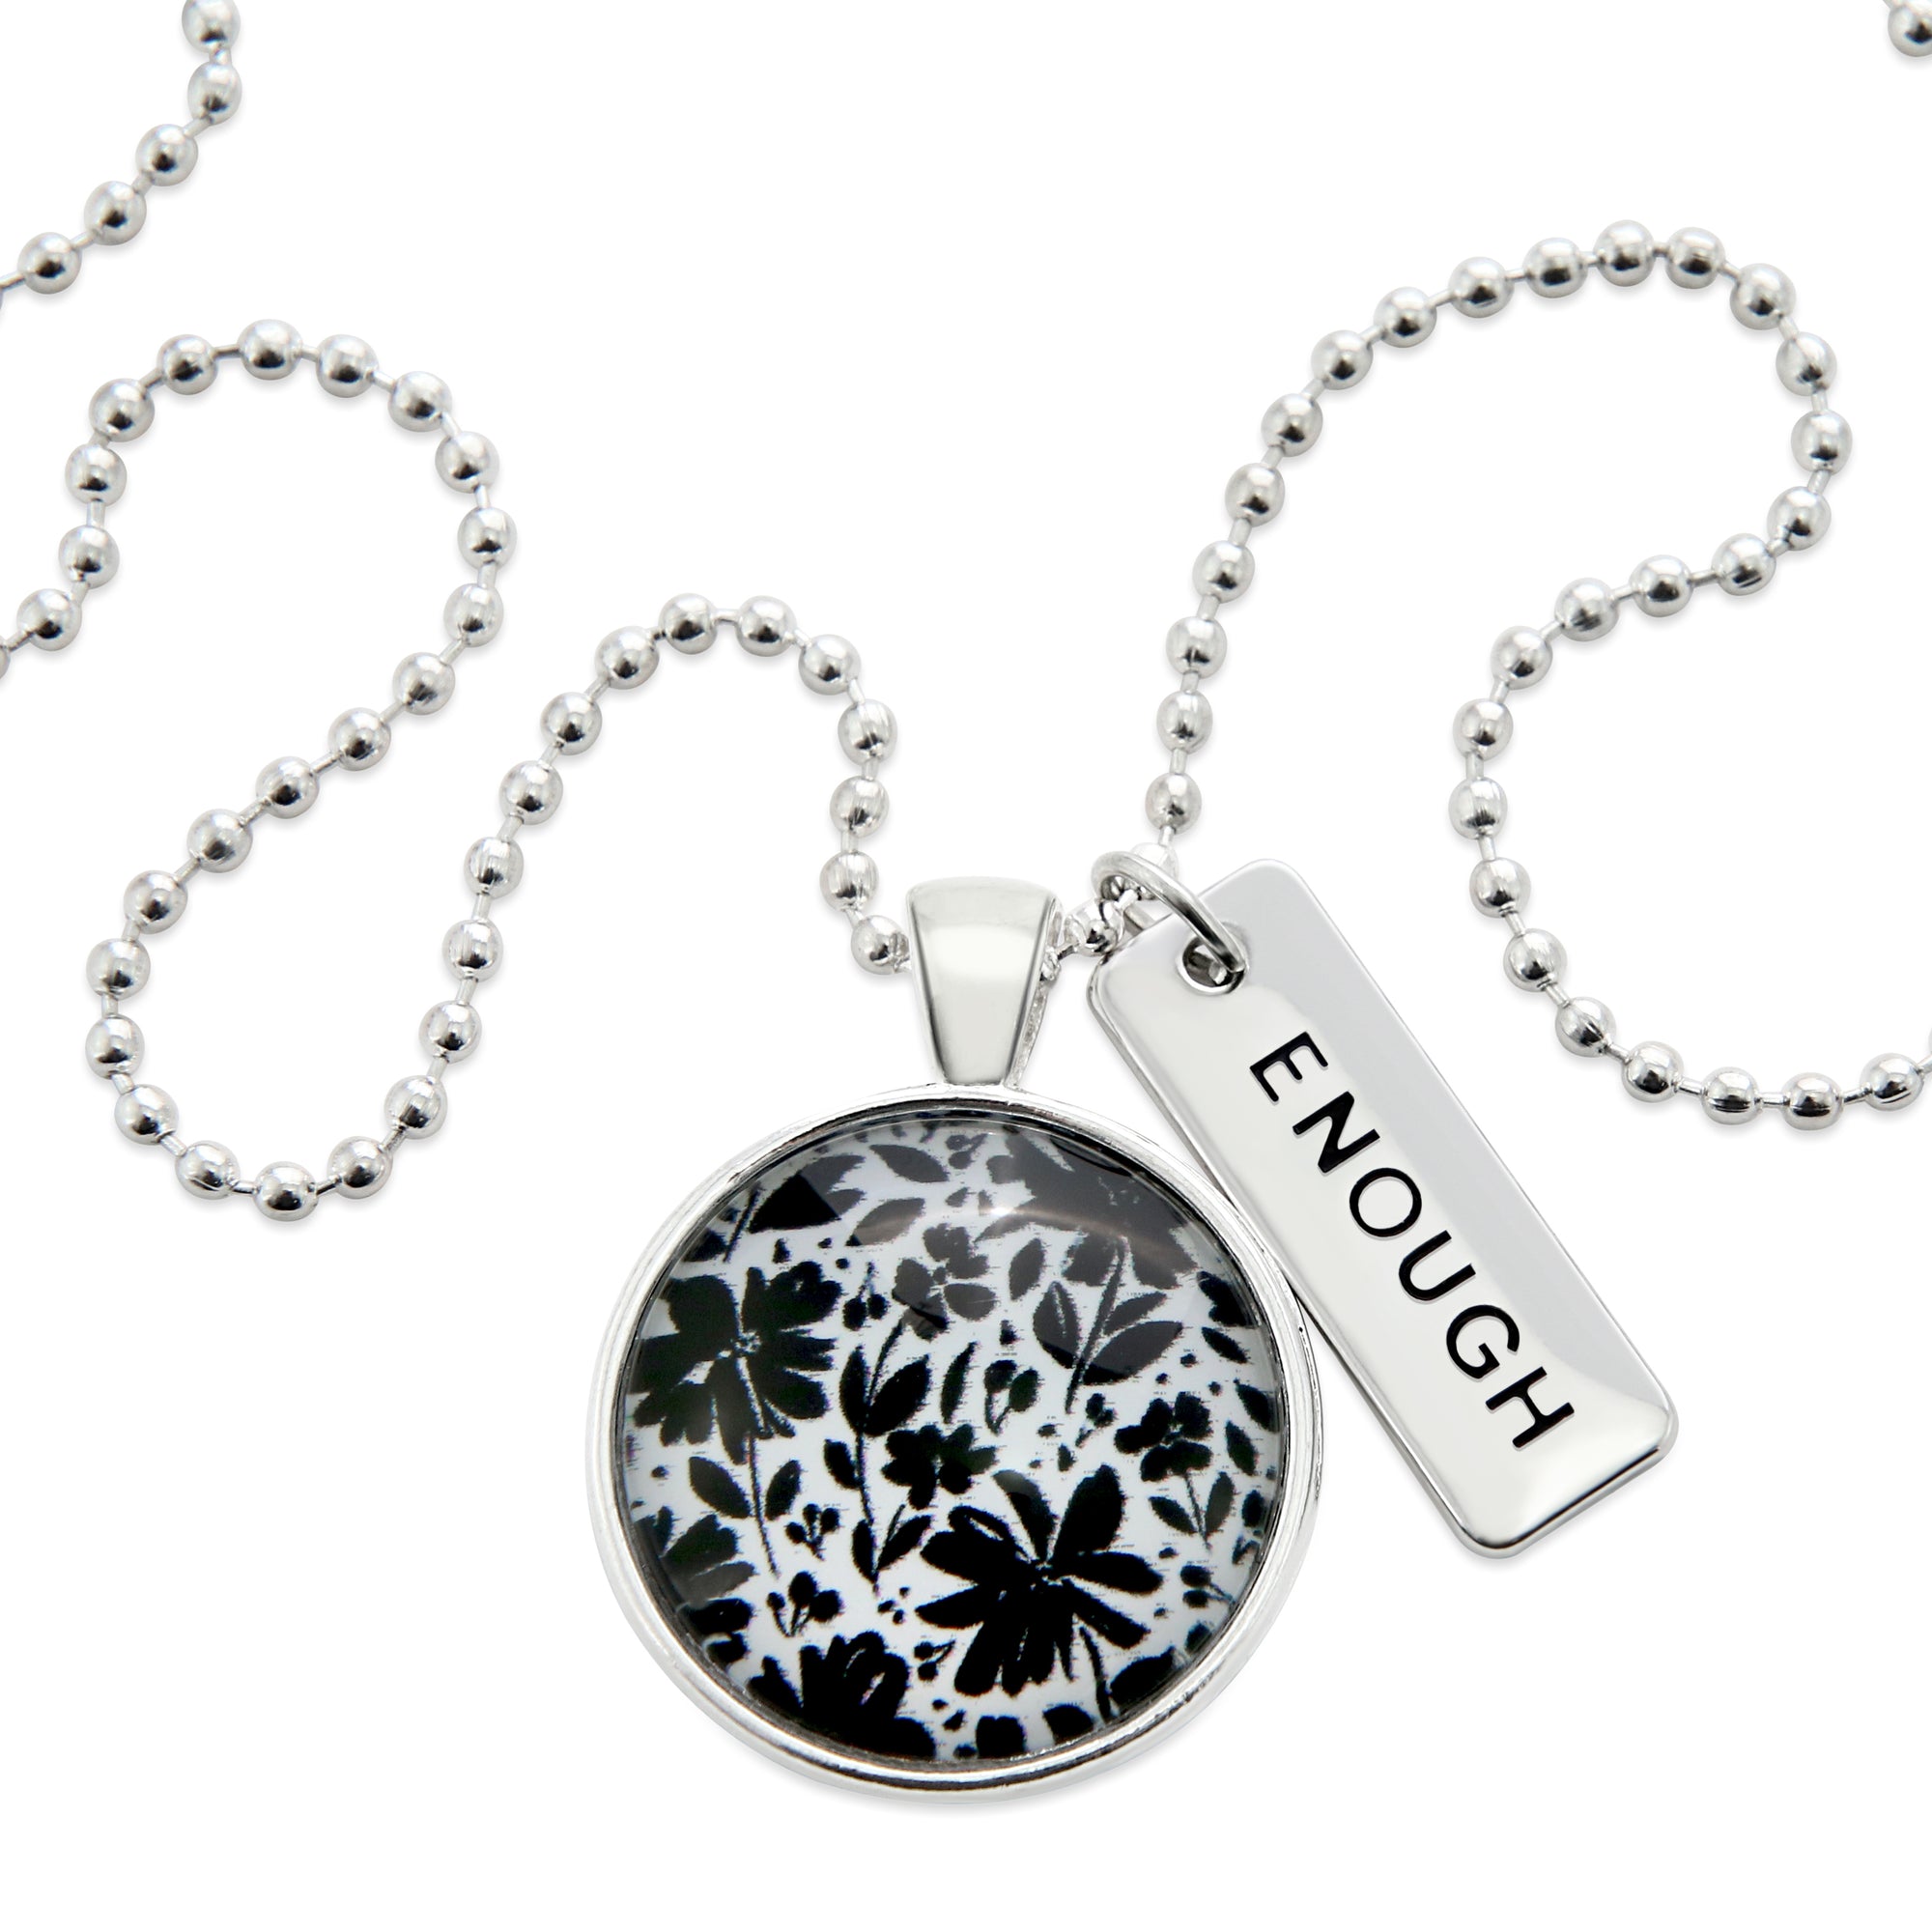 Black & White Collection - Bright Silver 'ENOUGH' Necklace - Inky Buds (10852)